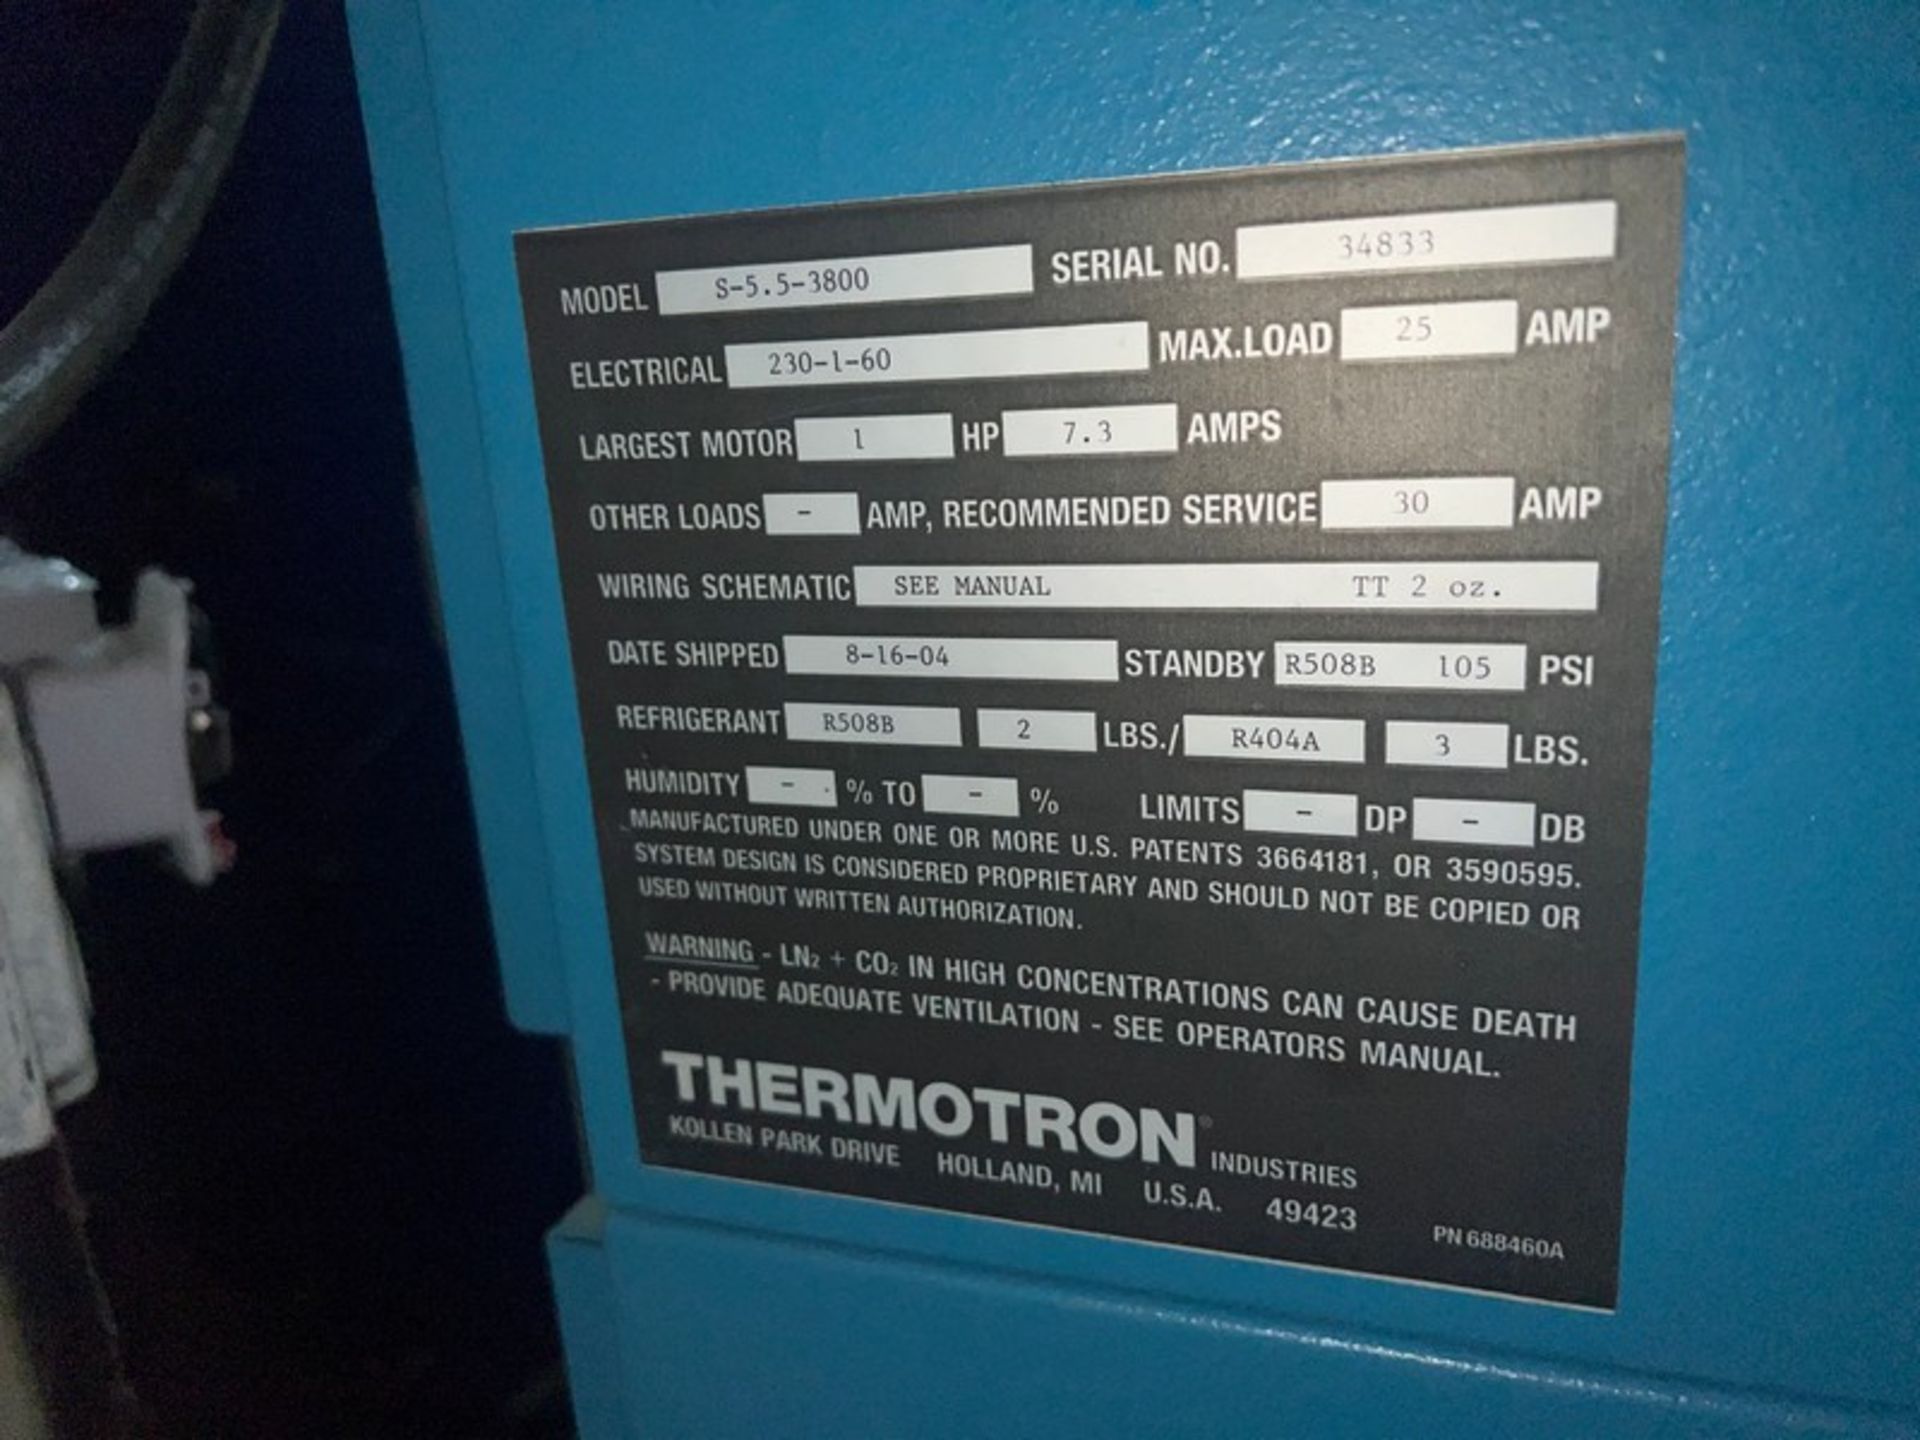 Thermotron Temperature Chamber Model S-5.5-3800, S/N 34833, Electrical 230-1-60, 1 hp Motor, - Image 8 of 8